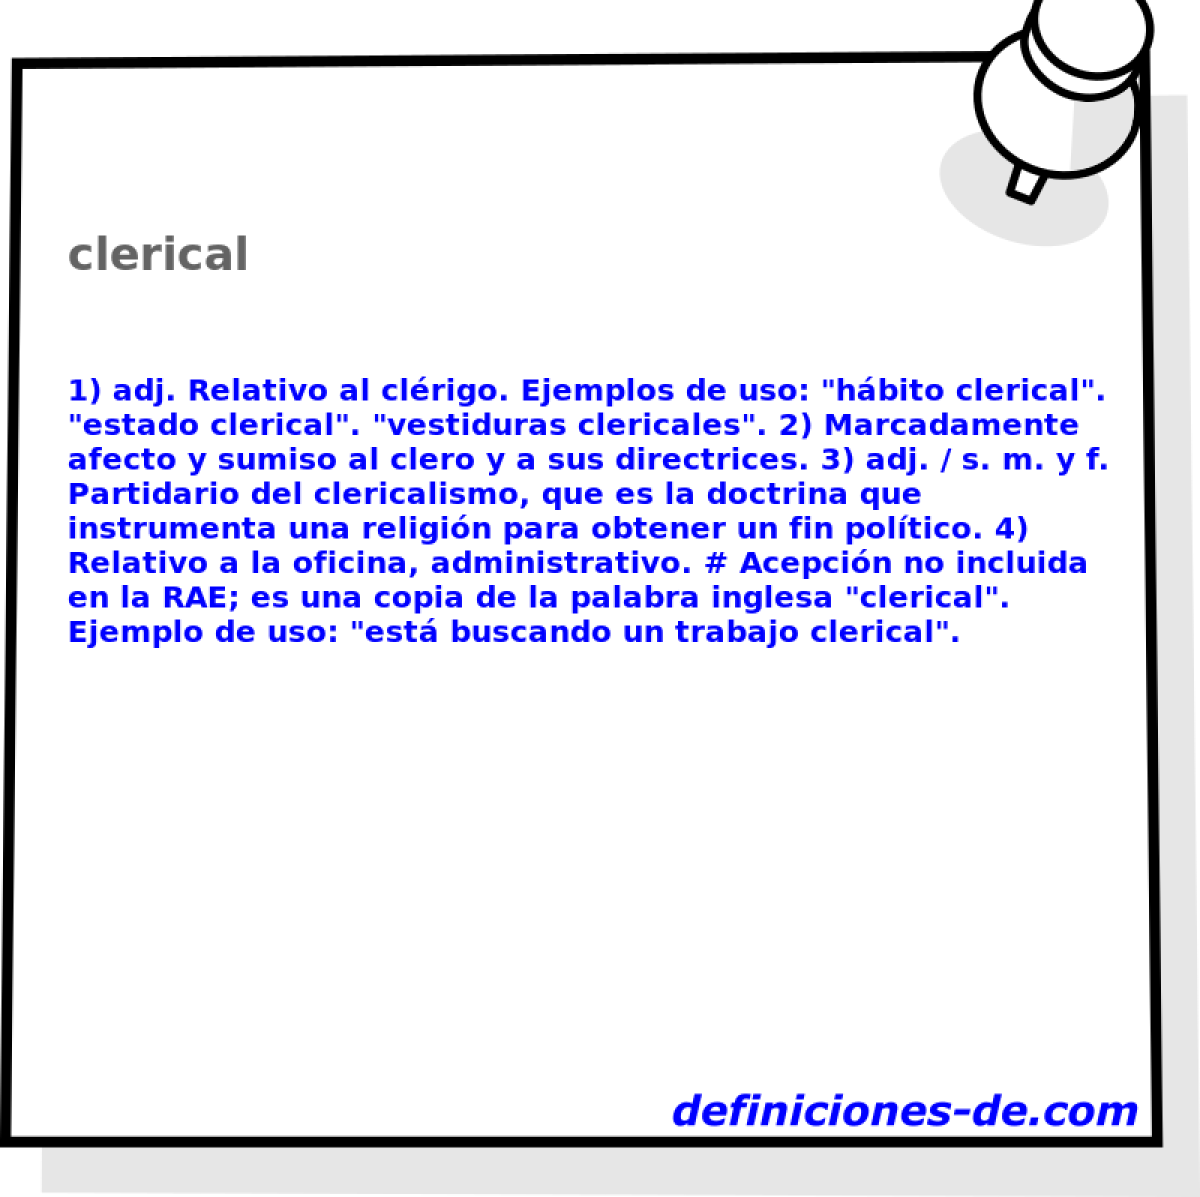 clerical 